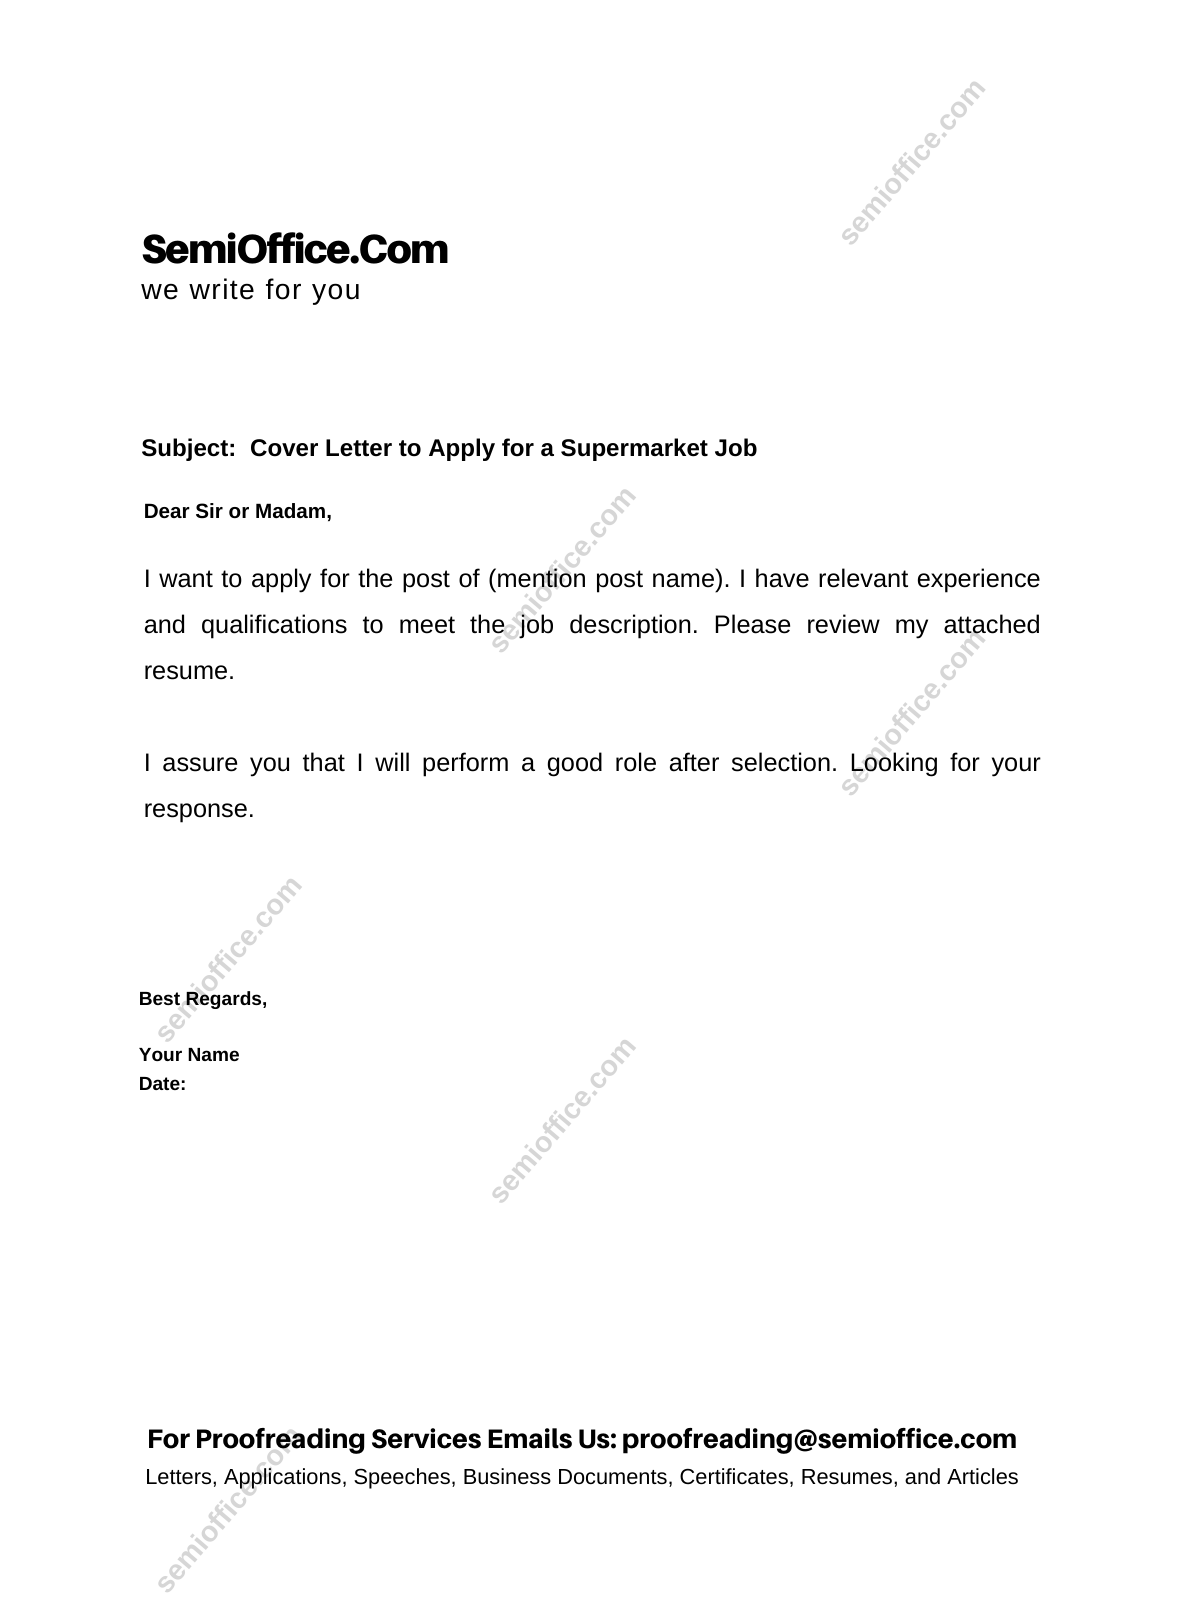 application letter for supermarket with no experience